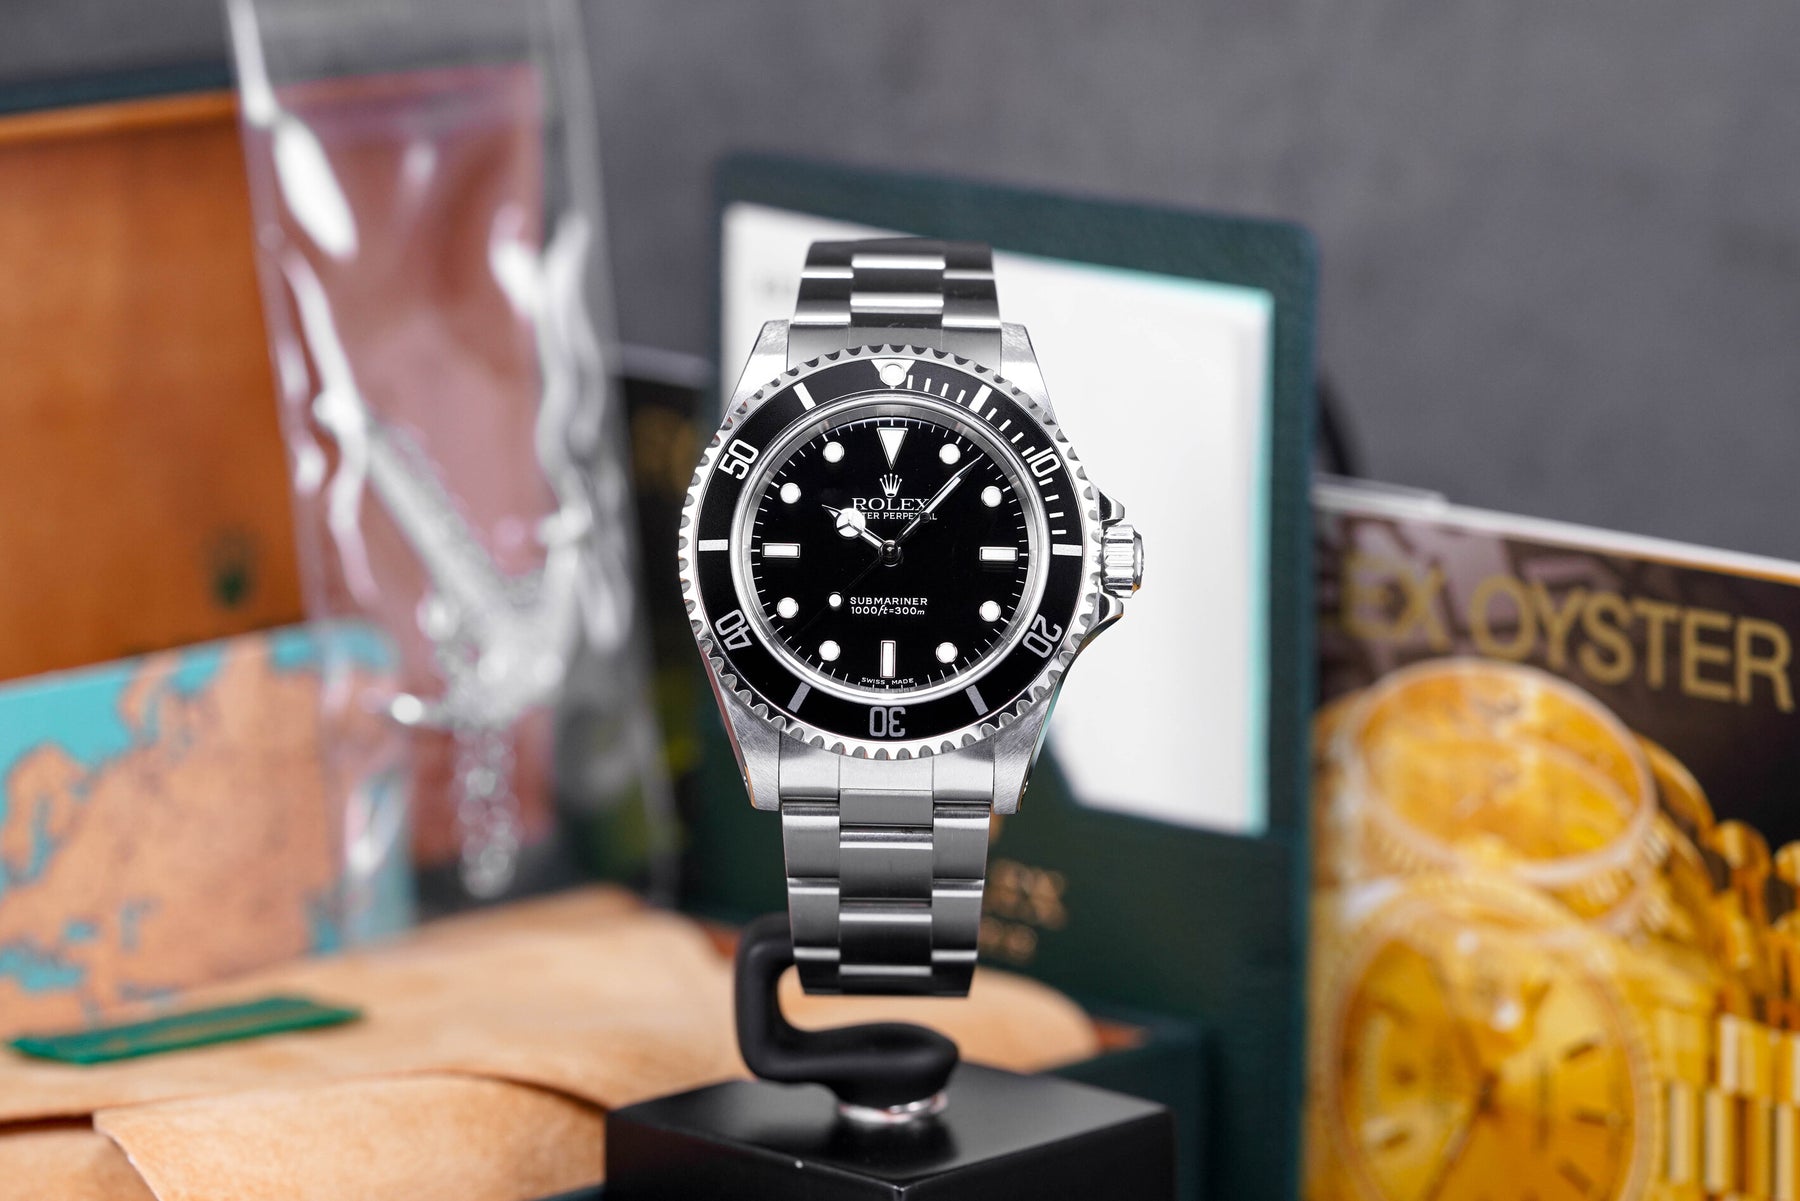 ROLEX SUBMARINER NO DATE 2 LINERS